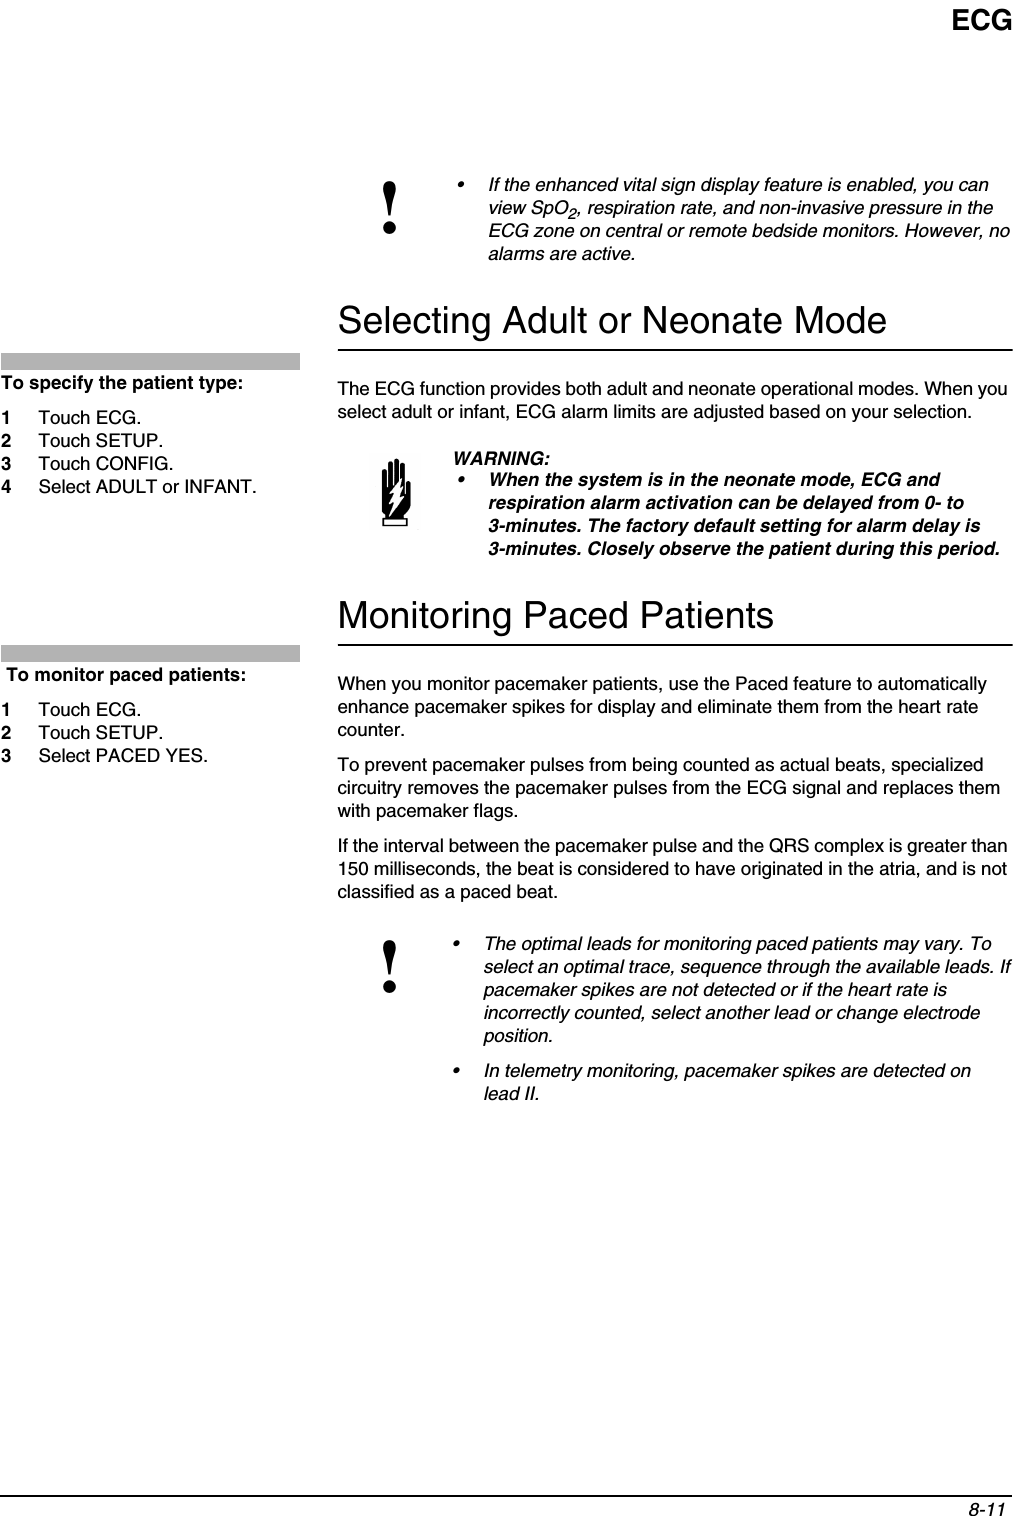 ECG8-11 Selecting Adult or Neonate ModeThe ECG function provides both adult and neonate operational modes. When you select adult or infant, ECG alarm limits are adjusted based on your selection.Monitoring Paced PatientsWhen you monitor pacemaker patients, use the Paced feature to automatically enhance pacemaker spikes for display and eliminate them from the heart rate counter. To prevent pacemaker pulses from being counted as actual beats, specialized circuitry removes the pacemaker pulses from the ECG signal and replaces them with pacemaker flags.If the interval between the pacemaker pulse and the QRS complex is greater than 150 milliseconds, the beat is considered to have originated in the atria, and is not classified as a paced beat.!• If the enhanced vital sign display feature is enabled, you can view SpO2, respiration rate, and non-invasive pressure in the ECG zone on central or remote bedside monitors. However, no alarms are active.WARNING:• When the system is in the neonate mode, ECG and respiration alarm activation can be delayed from 0- to 3-minutes. The factory default setting for alarm delay is 3-minutes. Closely observe the patient during this period. !• The optimal leads for monitoring paced patients may vary. To select an optimal trace, sequence through the available leads. If pacemaker spikes are not detected or if the heart rate is incorrectly counted, select another lead or change electrode position.• In telemetry monitoring, pacemaker spikes are detected on lead II.To specify the patient type:1Touch ECG.2Touch SETUP.3Touch CONFIG.4Select ADULT or INFANT. To monitor paced patients:1Touch ECG.2Touch SETUP. 3Select PACED YES.